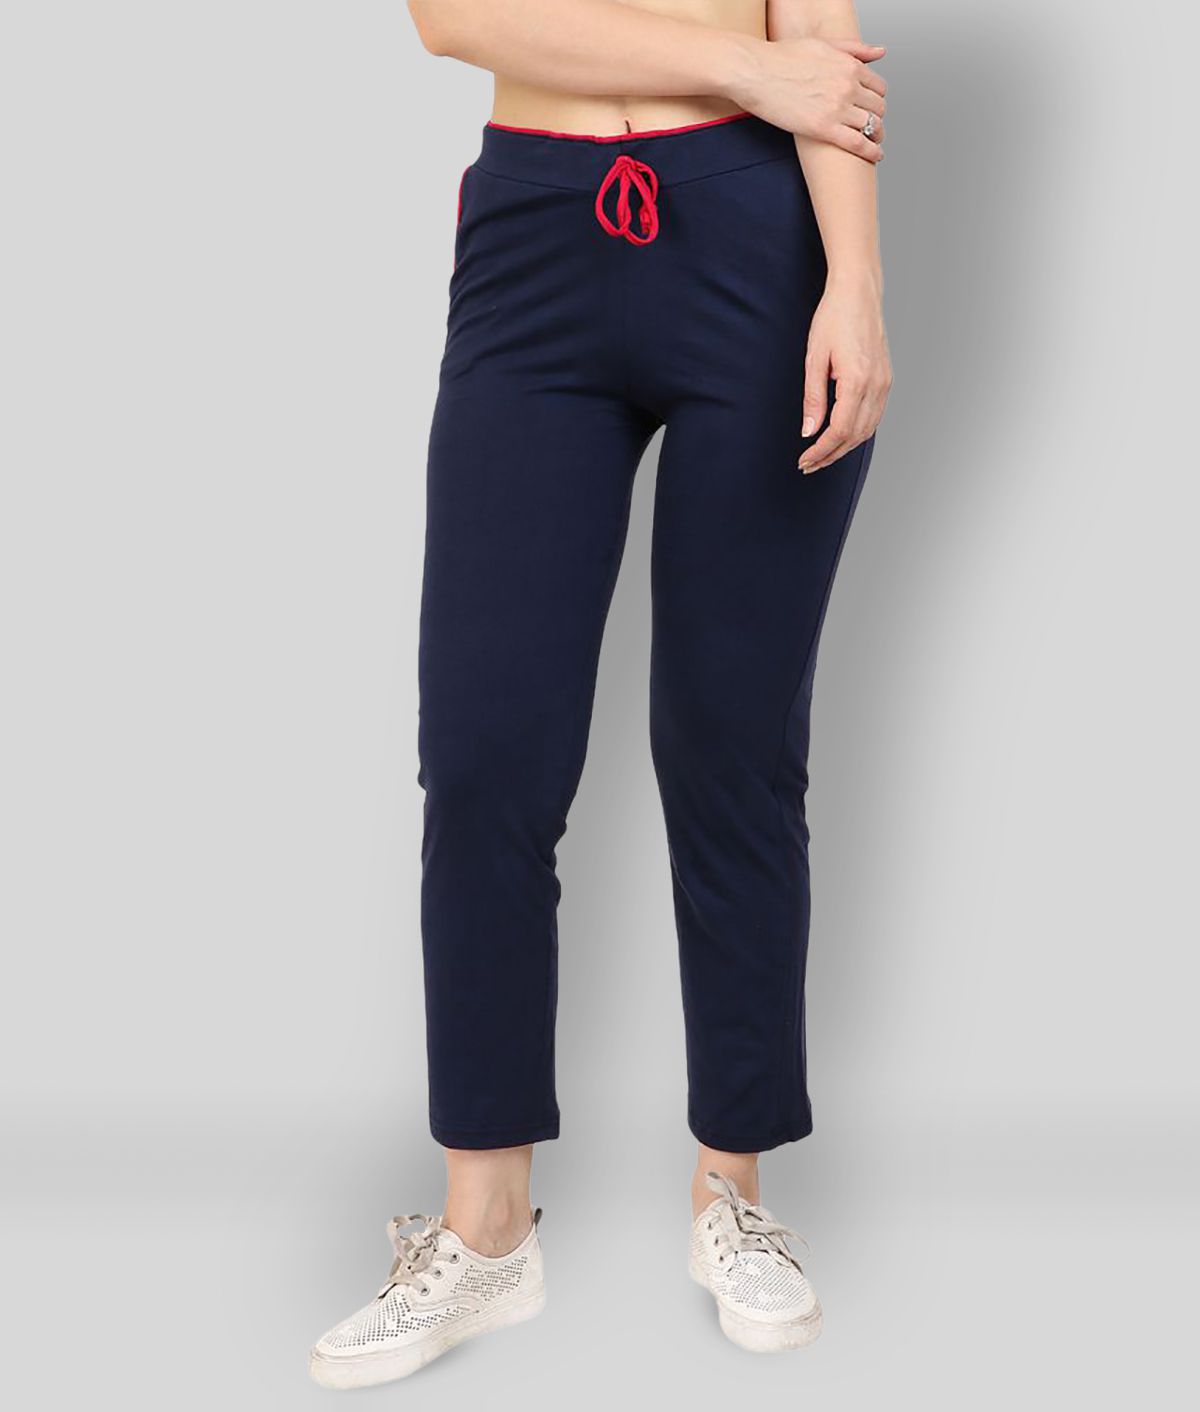     			Diaz - Navy Blue Cotton Women's Running Trackpants ( Pack of 1 )